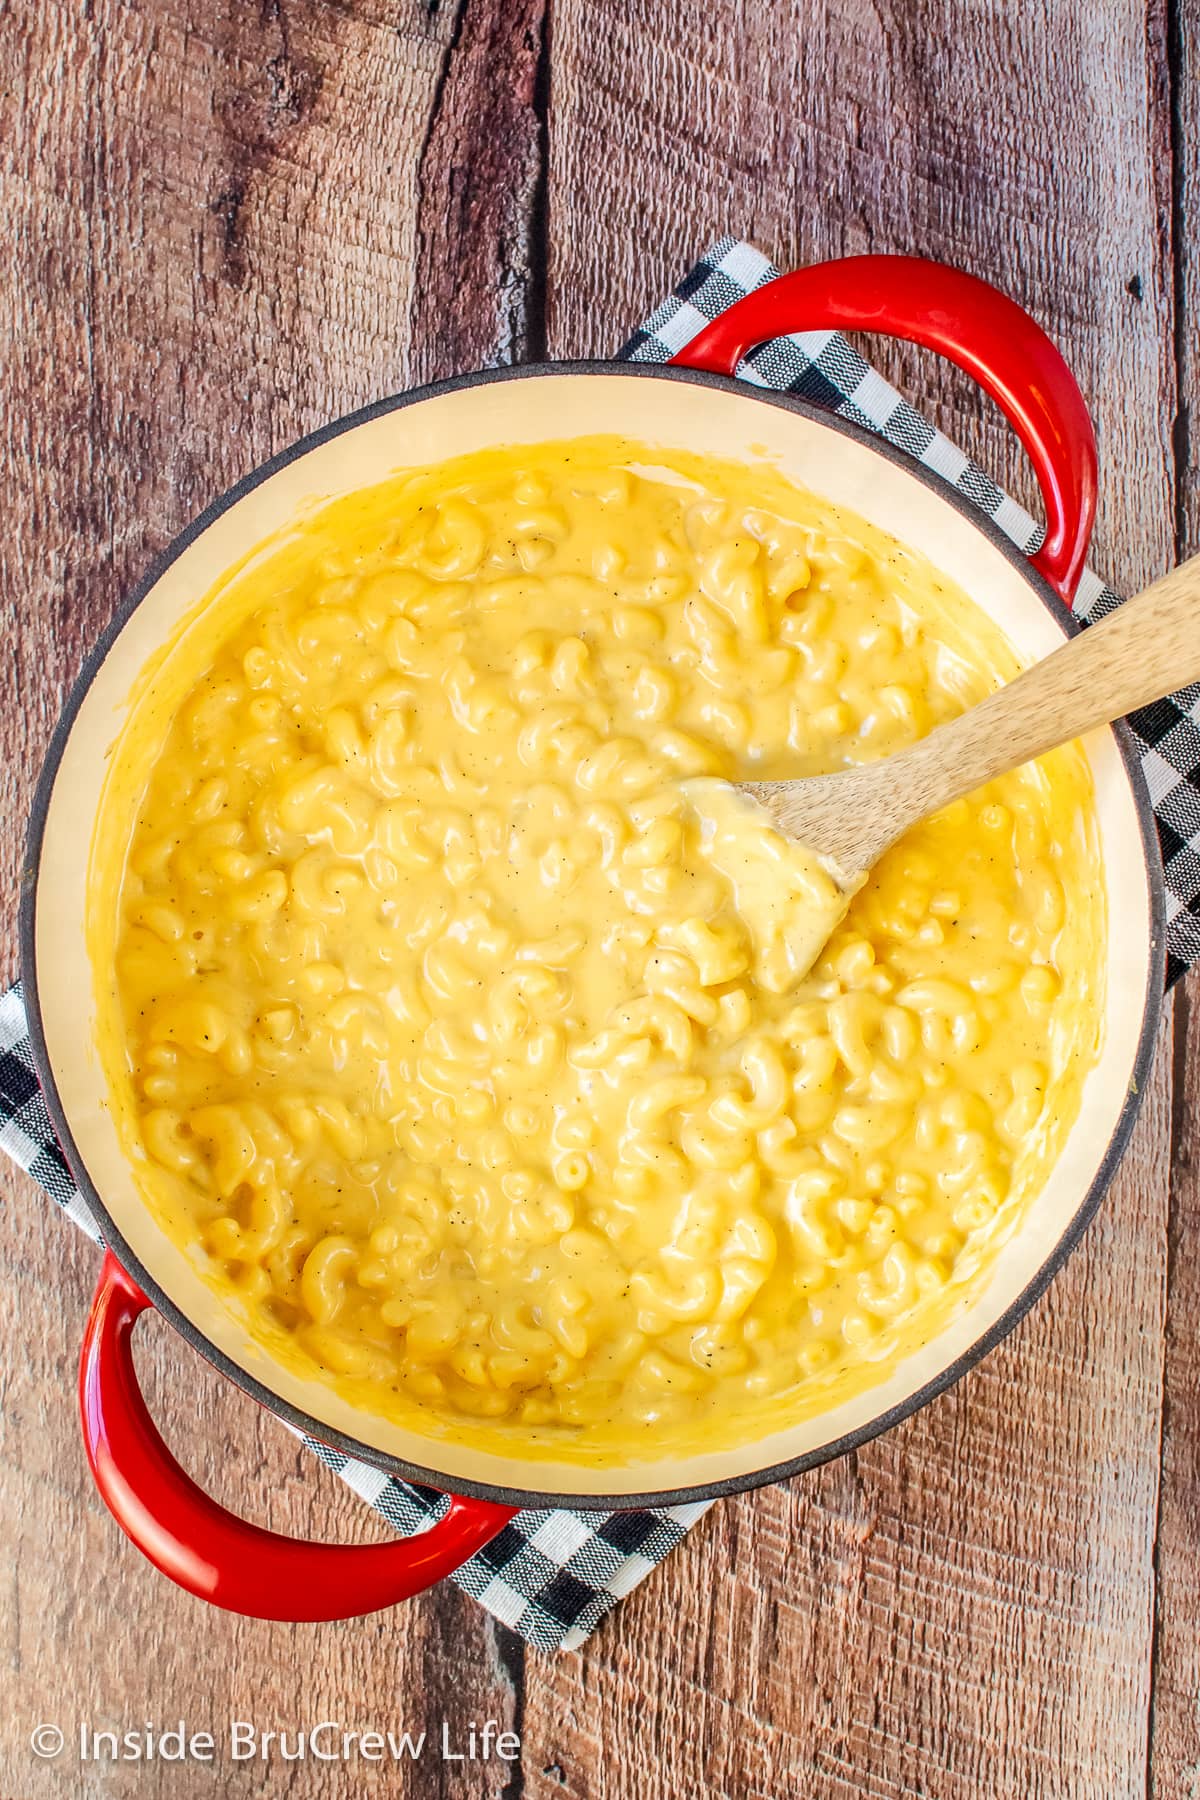 A pot full of creamy cheesy macaroni and cheese.